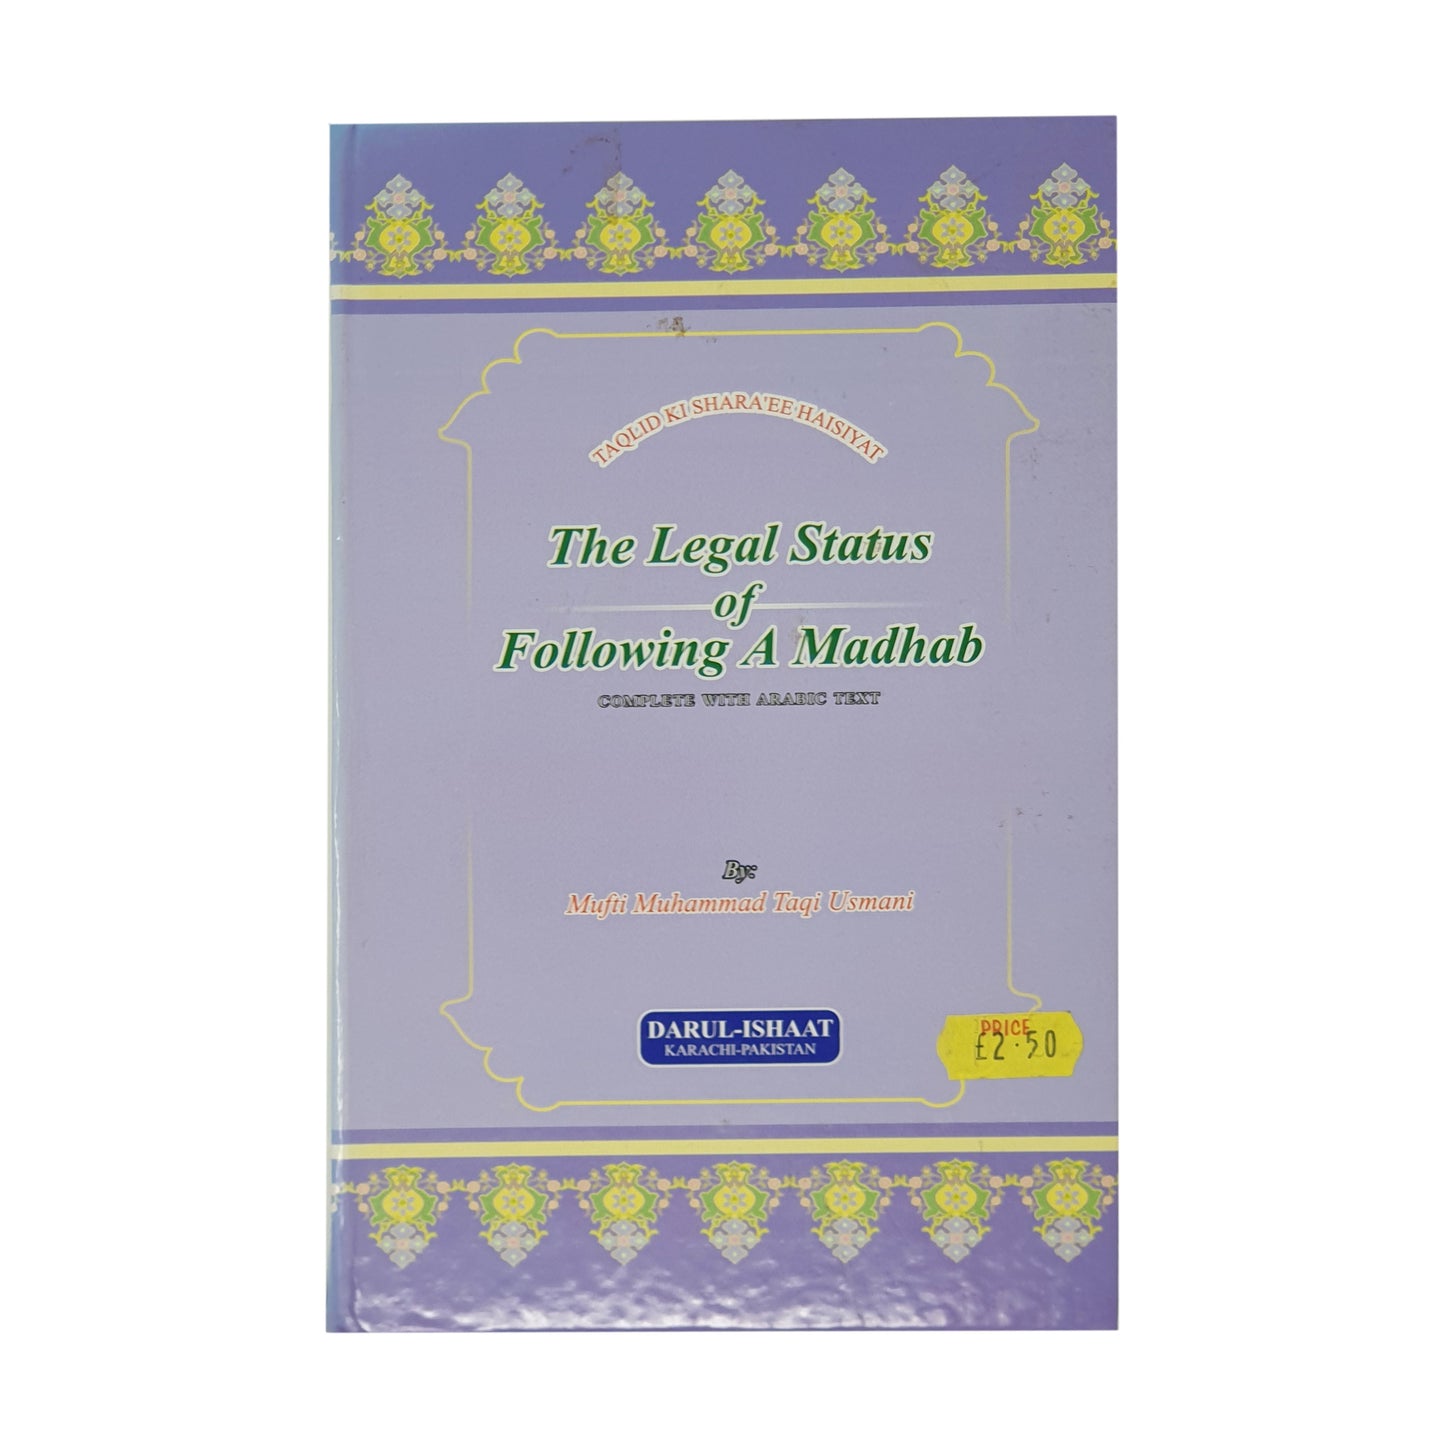 The Legal Status of Following a Madhab